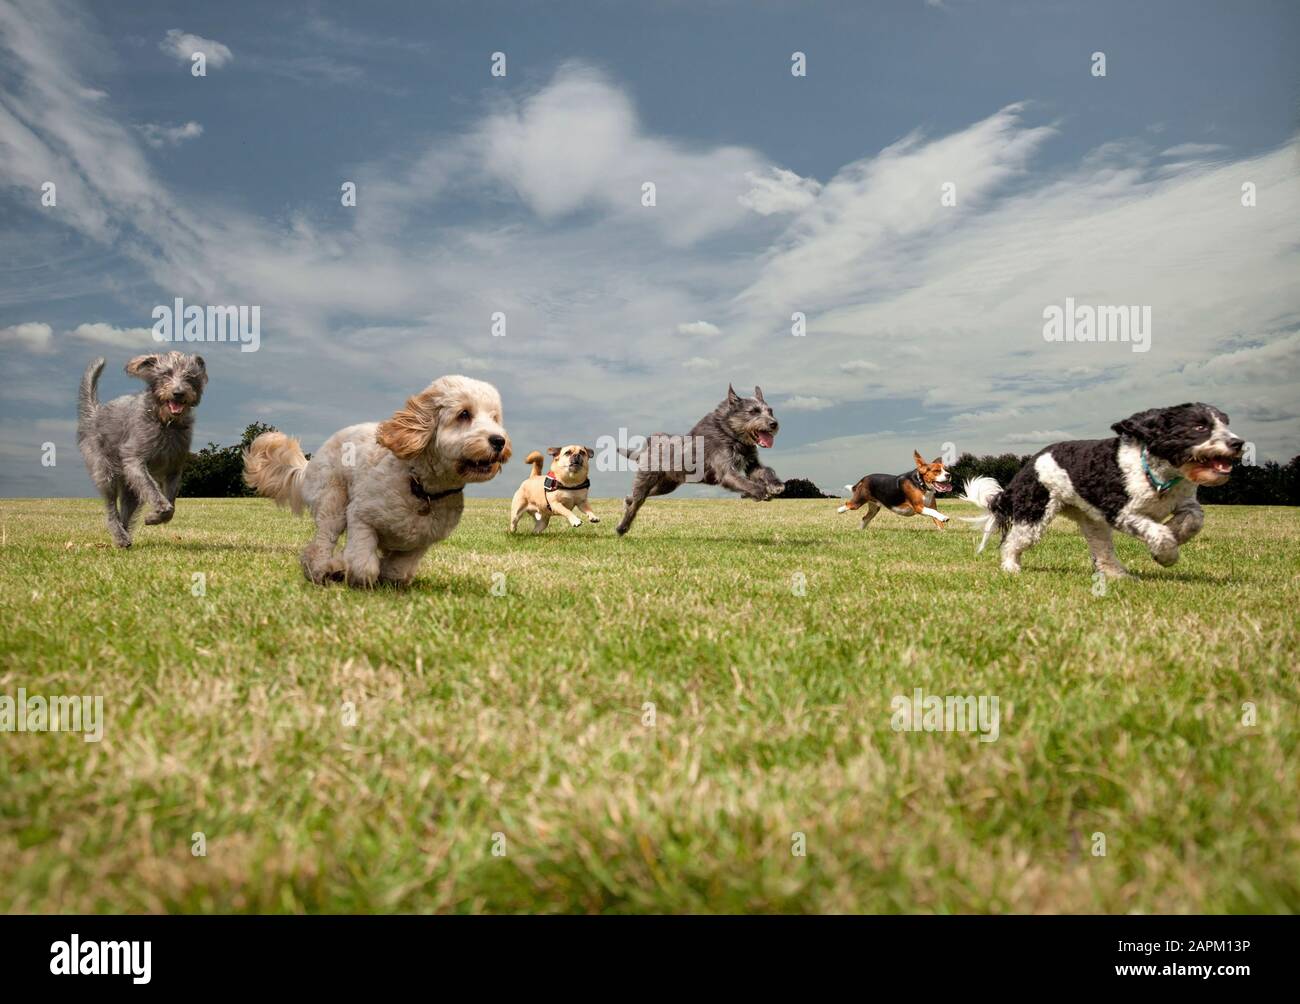 Dogs chasing each other in a park, left to right: Irish Wolfhound, Petit Basset Griffon Vendeen, Swedish Vallhund, Irish Wolfhound, Beagle, Spinone It Stock Photo